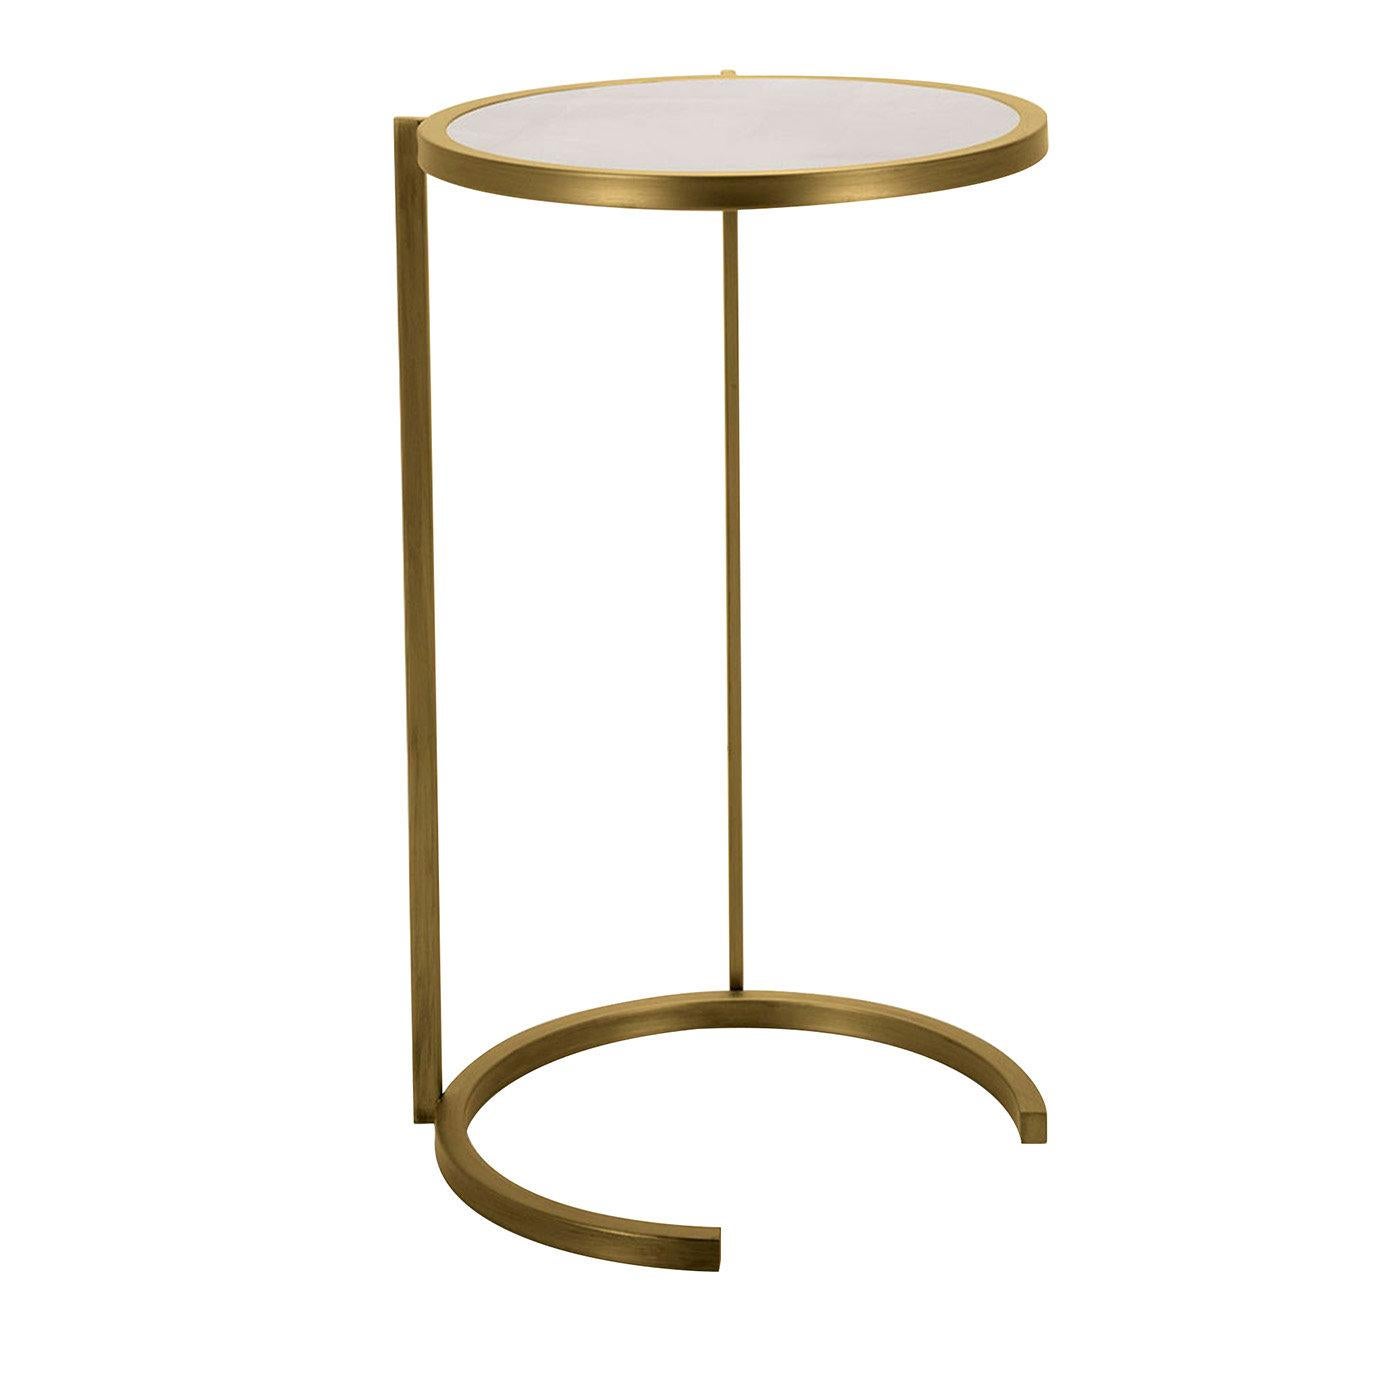 This graceful, handcrafted accent table inspired by Thetis - Greek goddess of seas and metamorphoses - is a harmonious combination of shaded finishes and delicately rounded silhouettes. The airy metal frame with a burnished brass finish develops